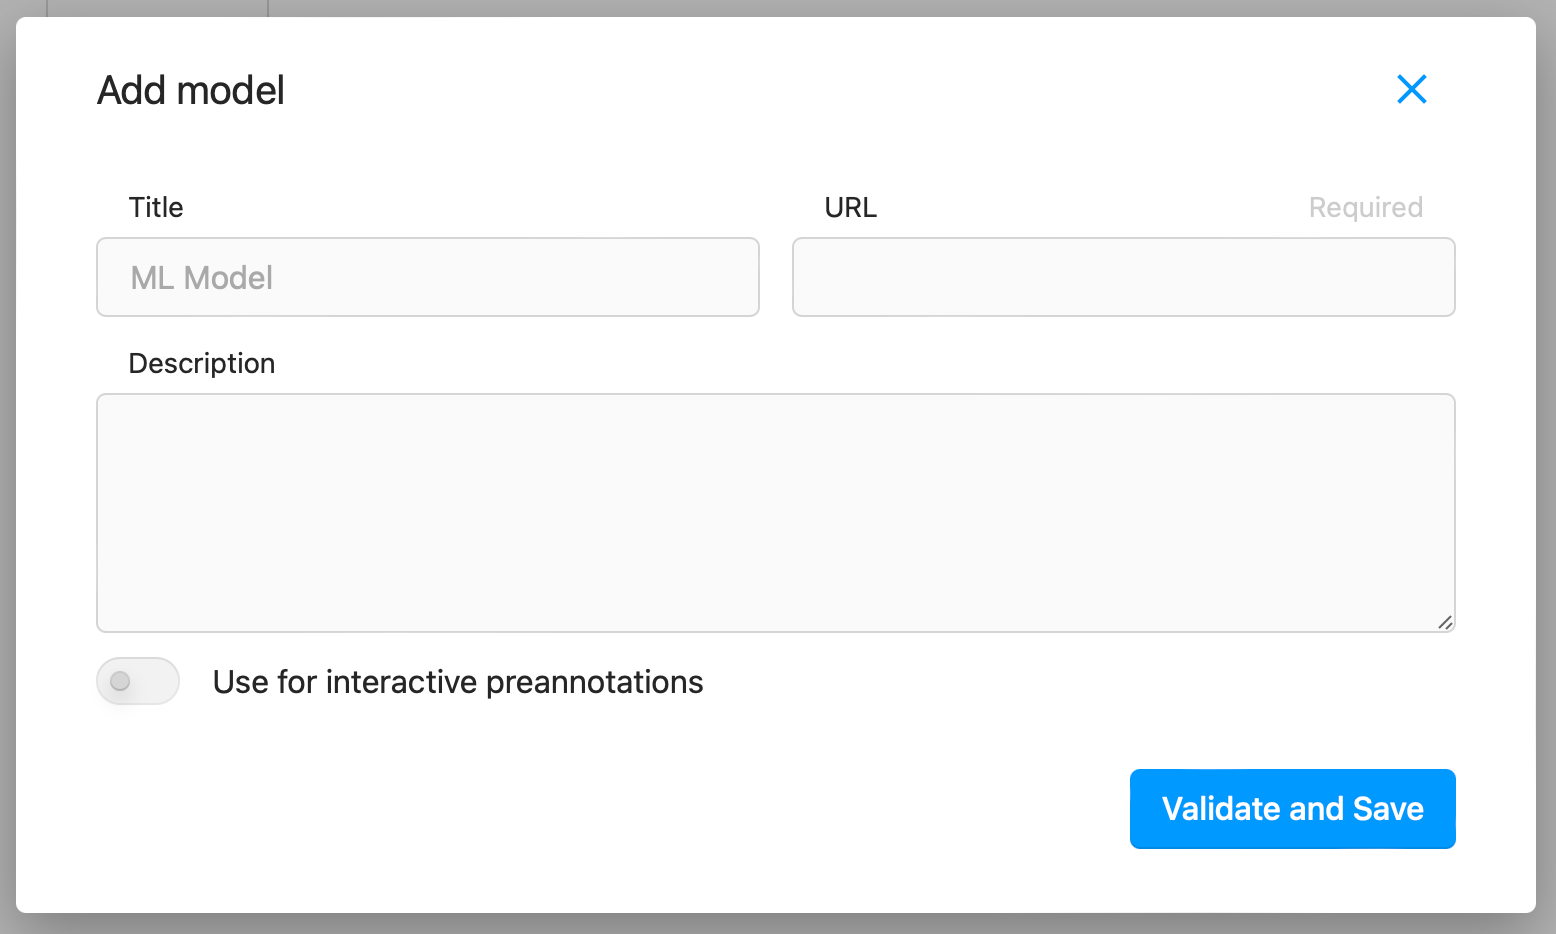 A screenshot of the Add model dialog box. There are 3 text fields, Title, URL, and Description. Additionally, there is a toggle for Use for interactive pre annotations. Finally in the bottom right is a blue Validate and Save button.